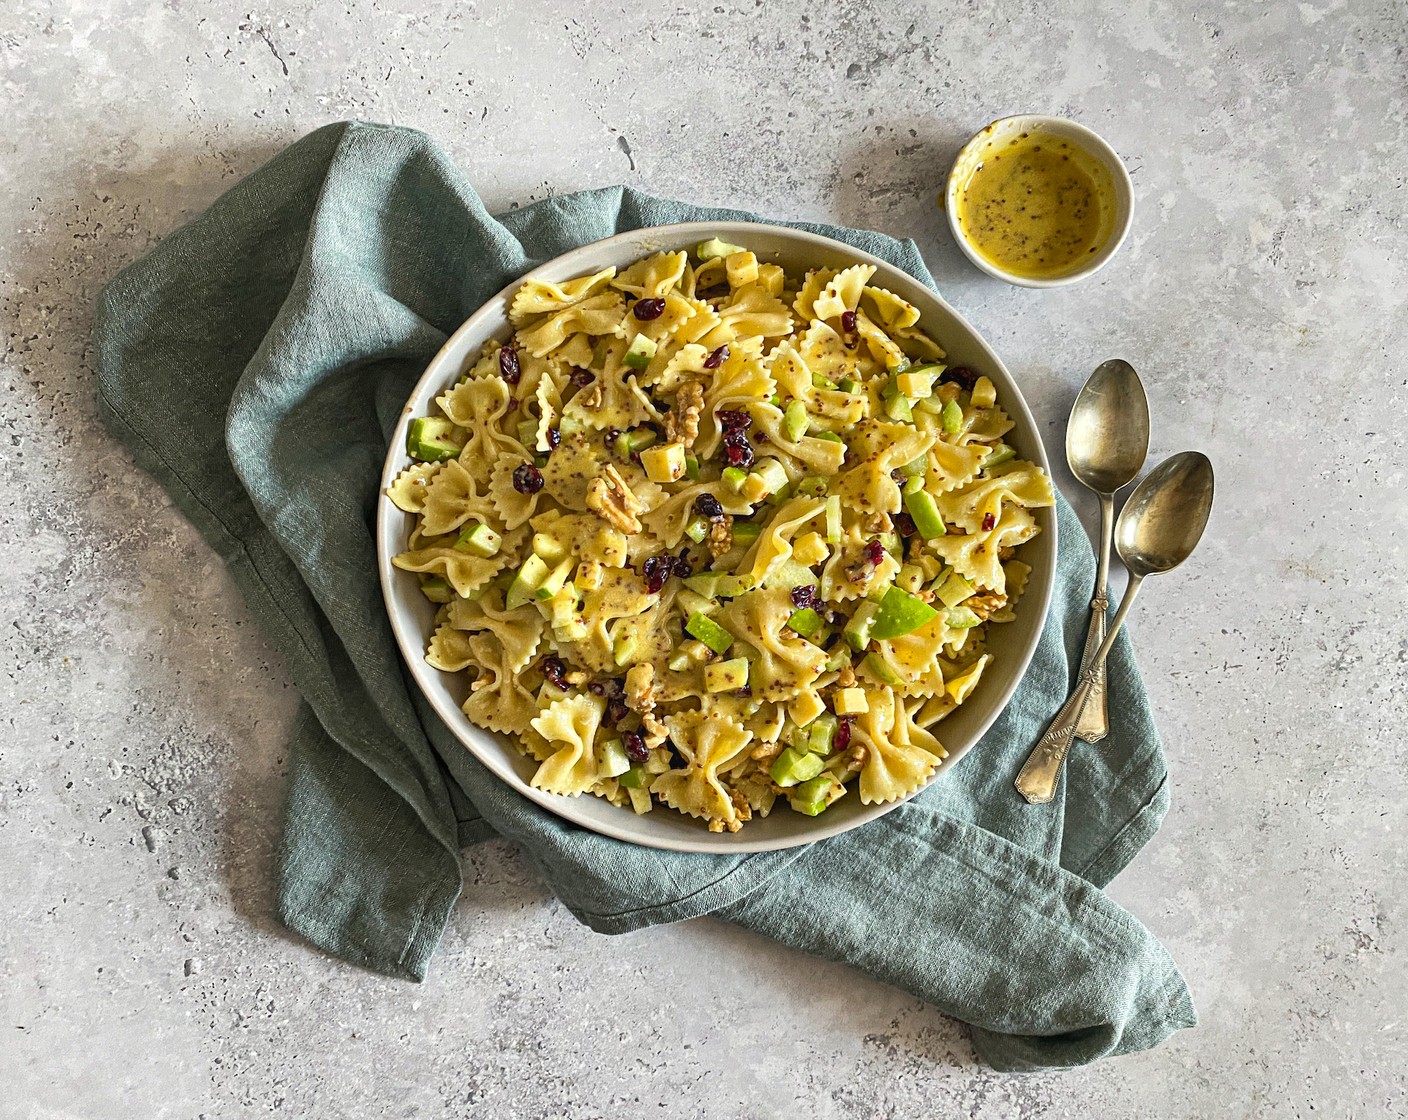 Potluck Pasta Salad with Apple, Walnuts, Celery, Dried Cranberries & Cheddar